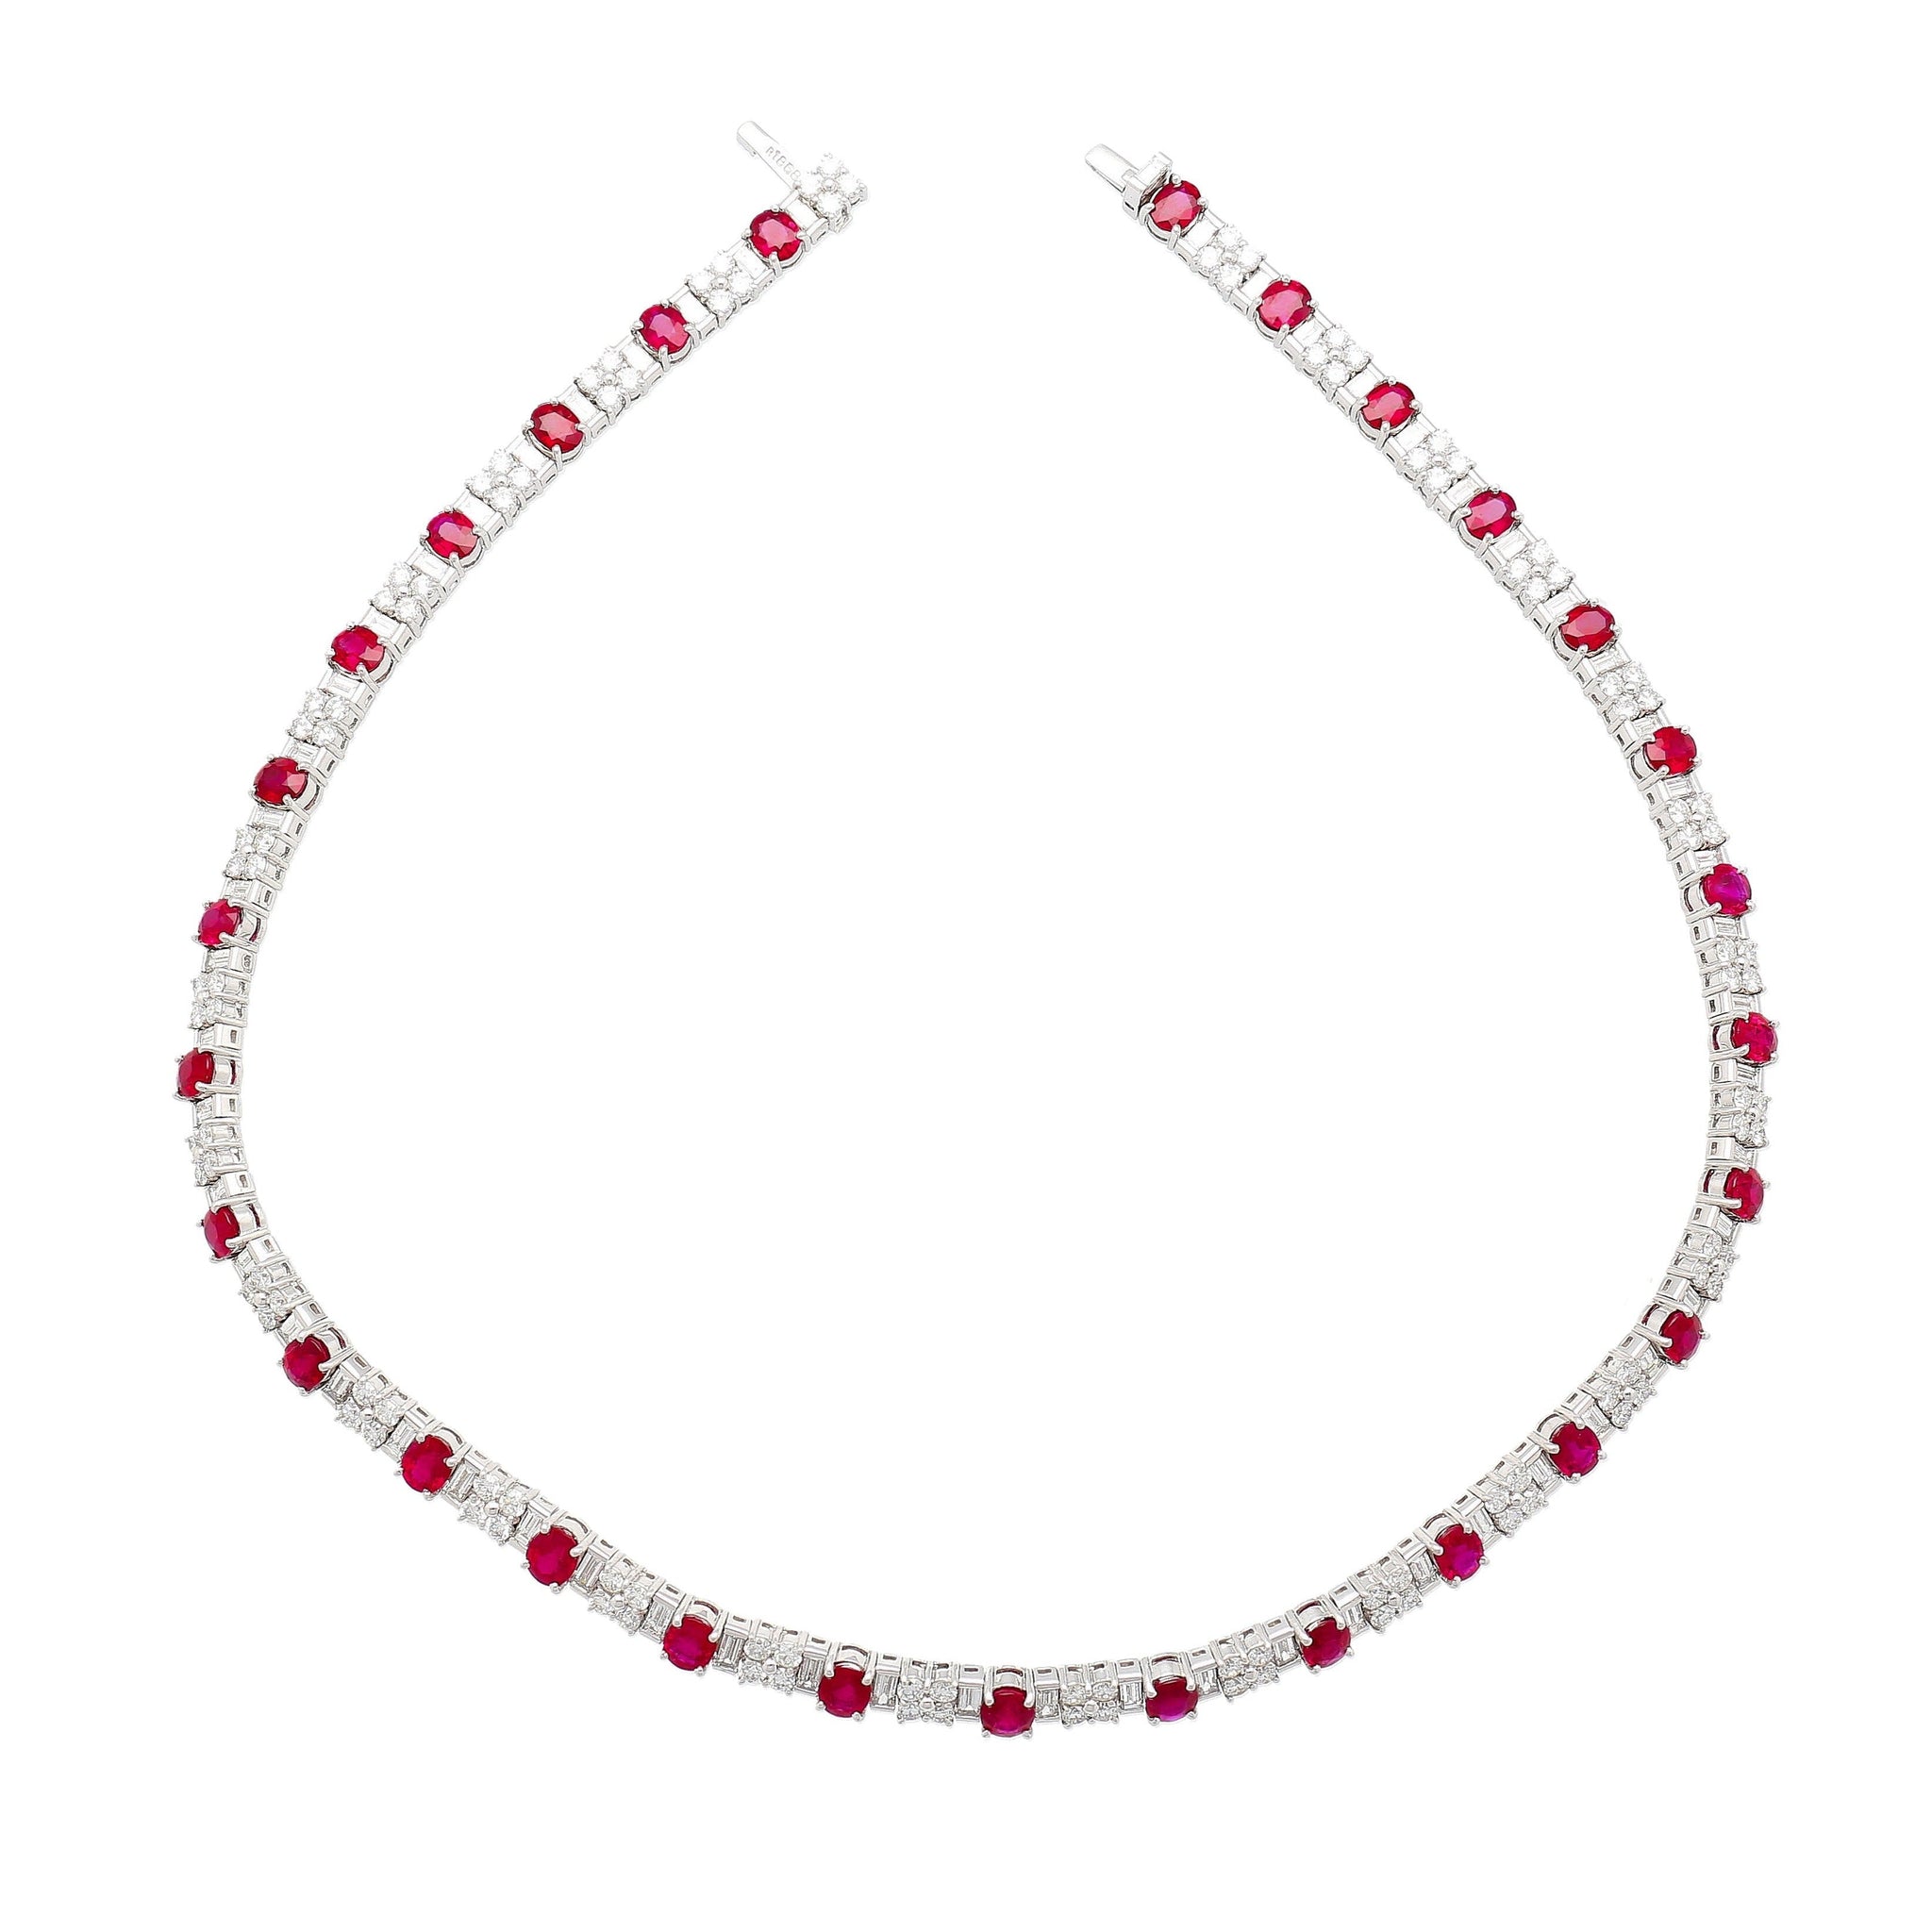 30 Carat TW Oval Cut Ruby and Diamond Tennis Necklace in Platinum